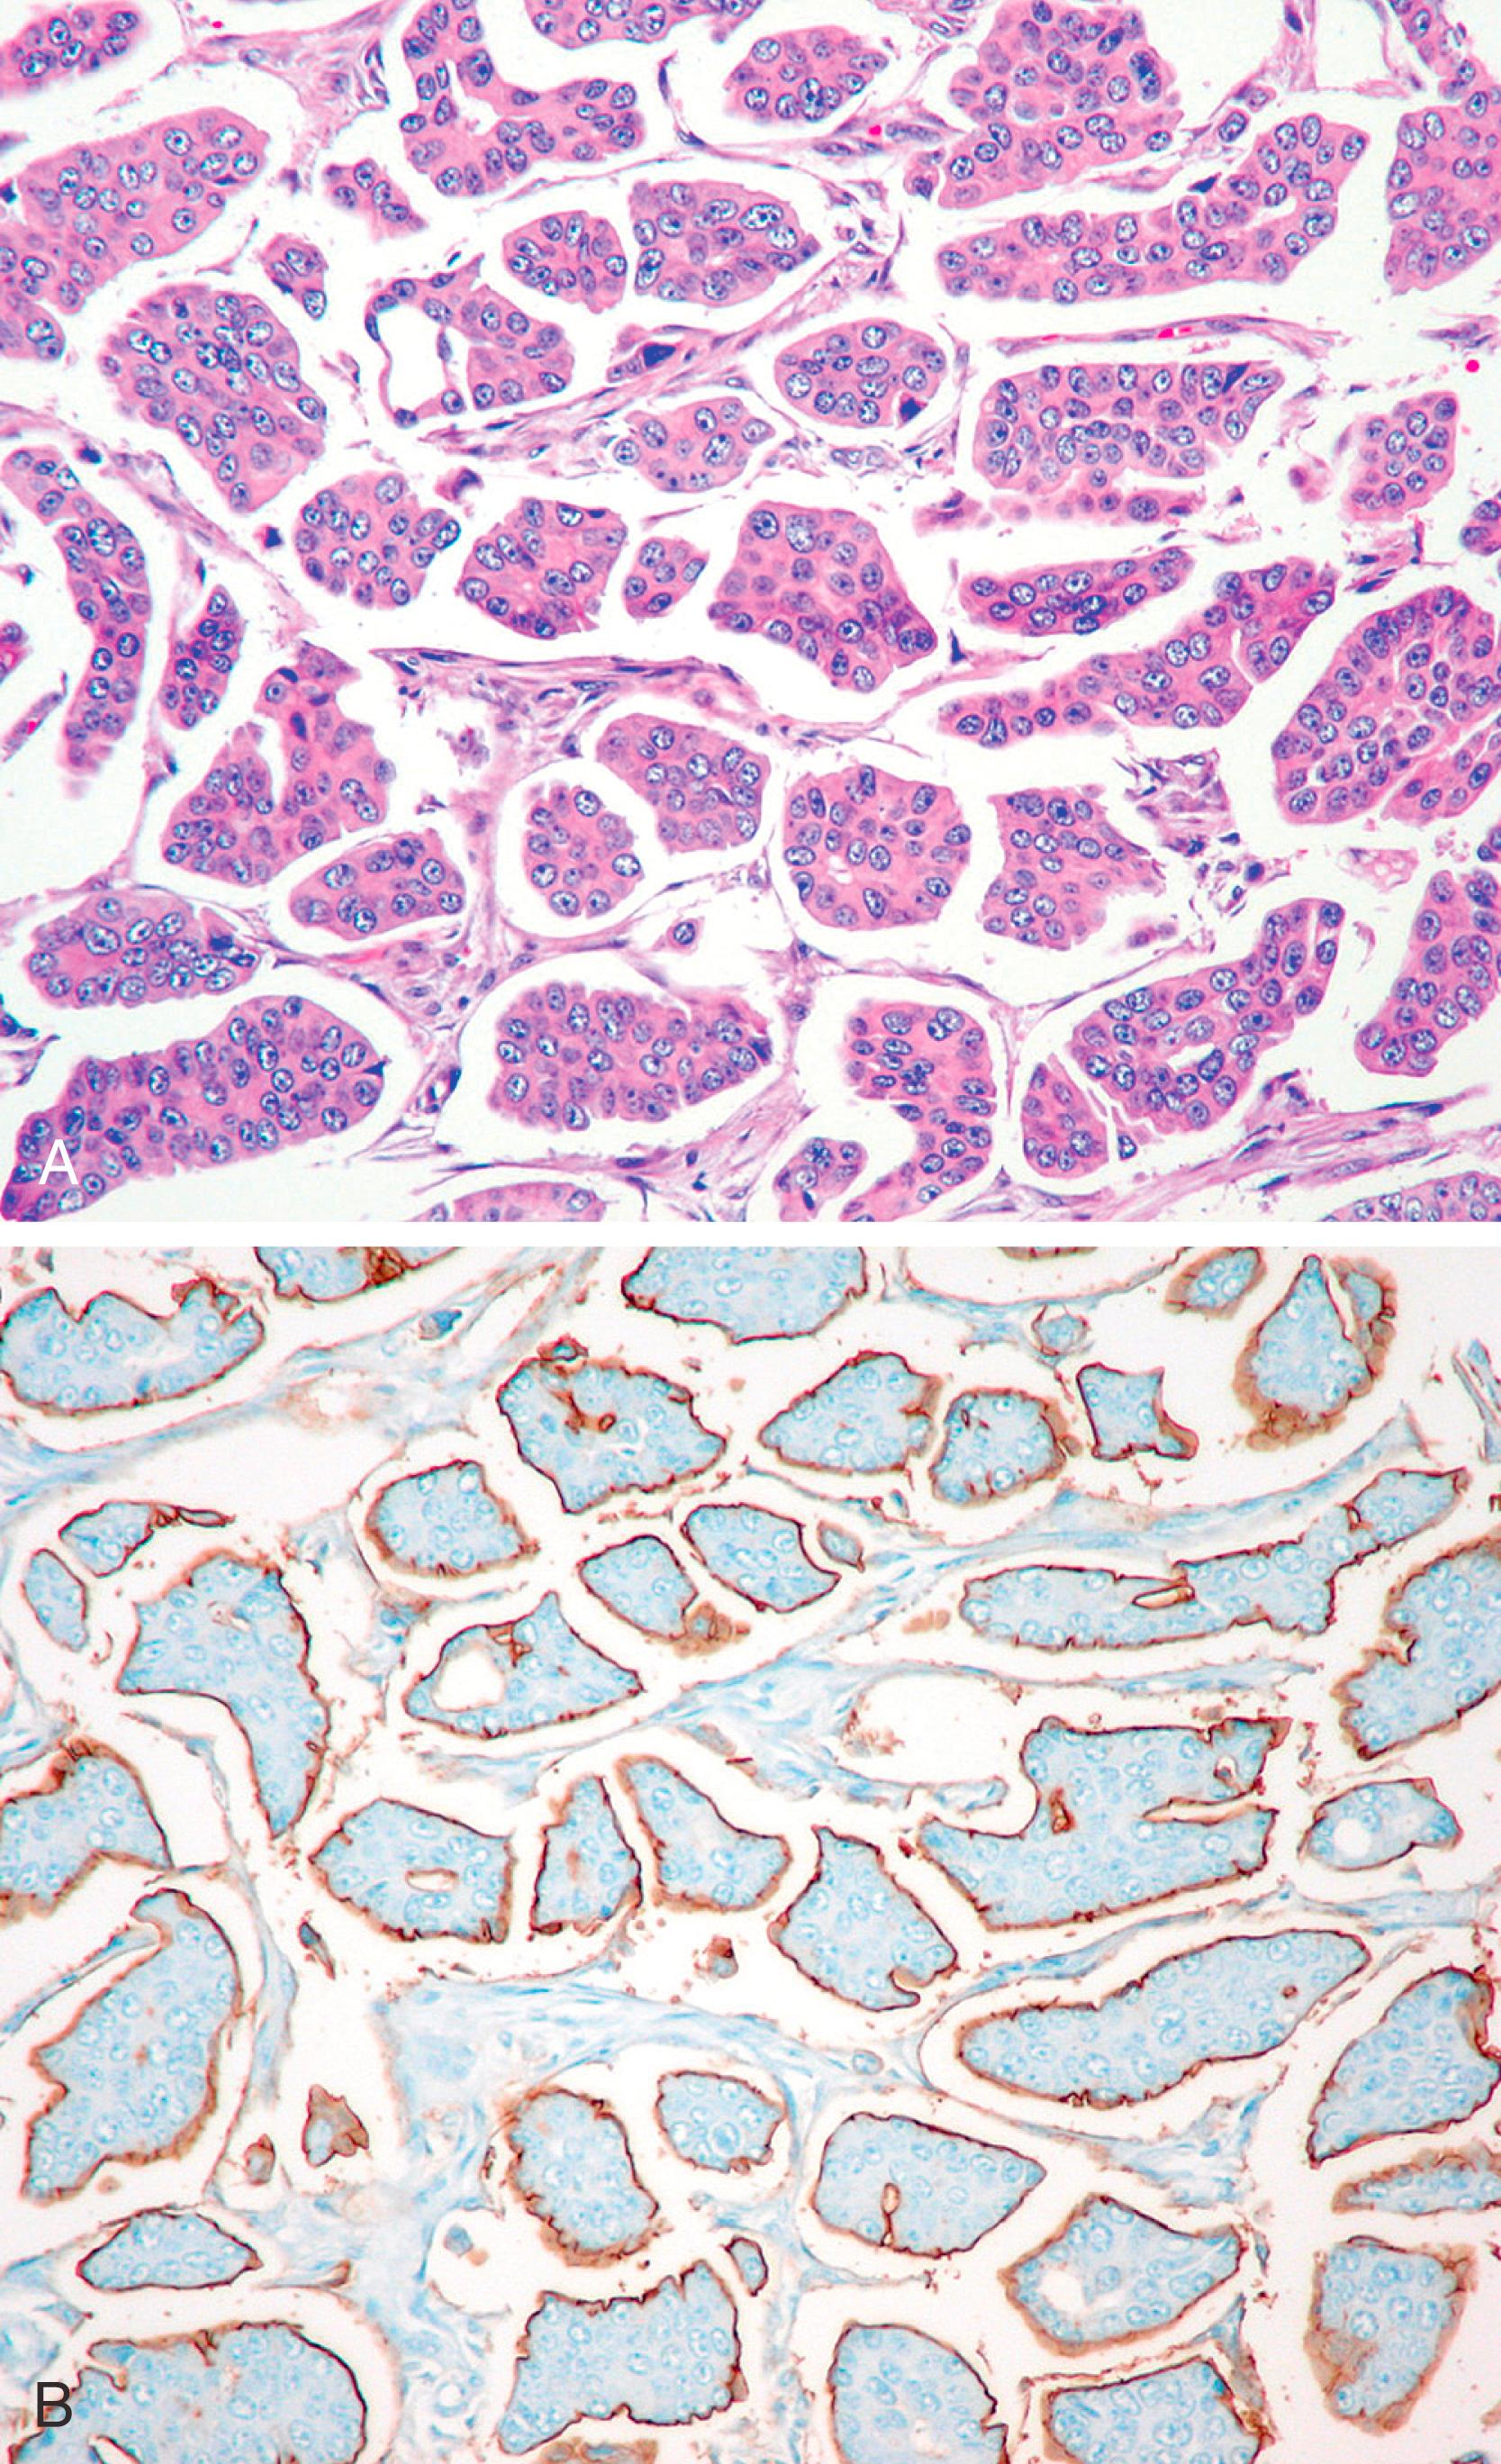 Fig. 19.24, An invasive micropapillary carcinoma of the breast (A) demonstrating “reverse polarity” of the neoplastic cells by epithelial membrane antigen (EMA) (B). Note the intense staining by EMA at the stroma-facing side of the cells.